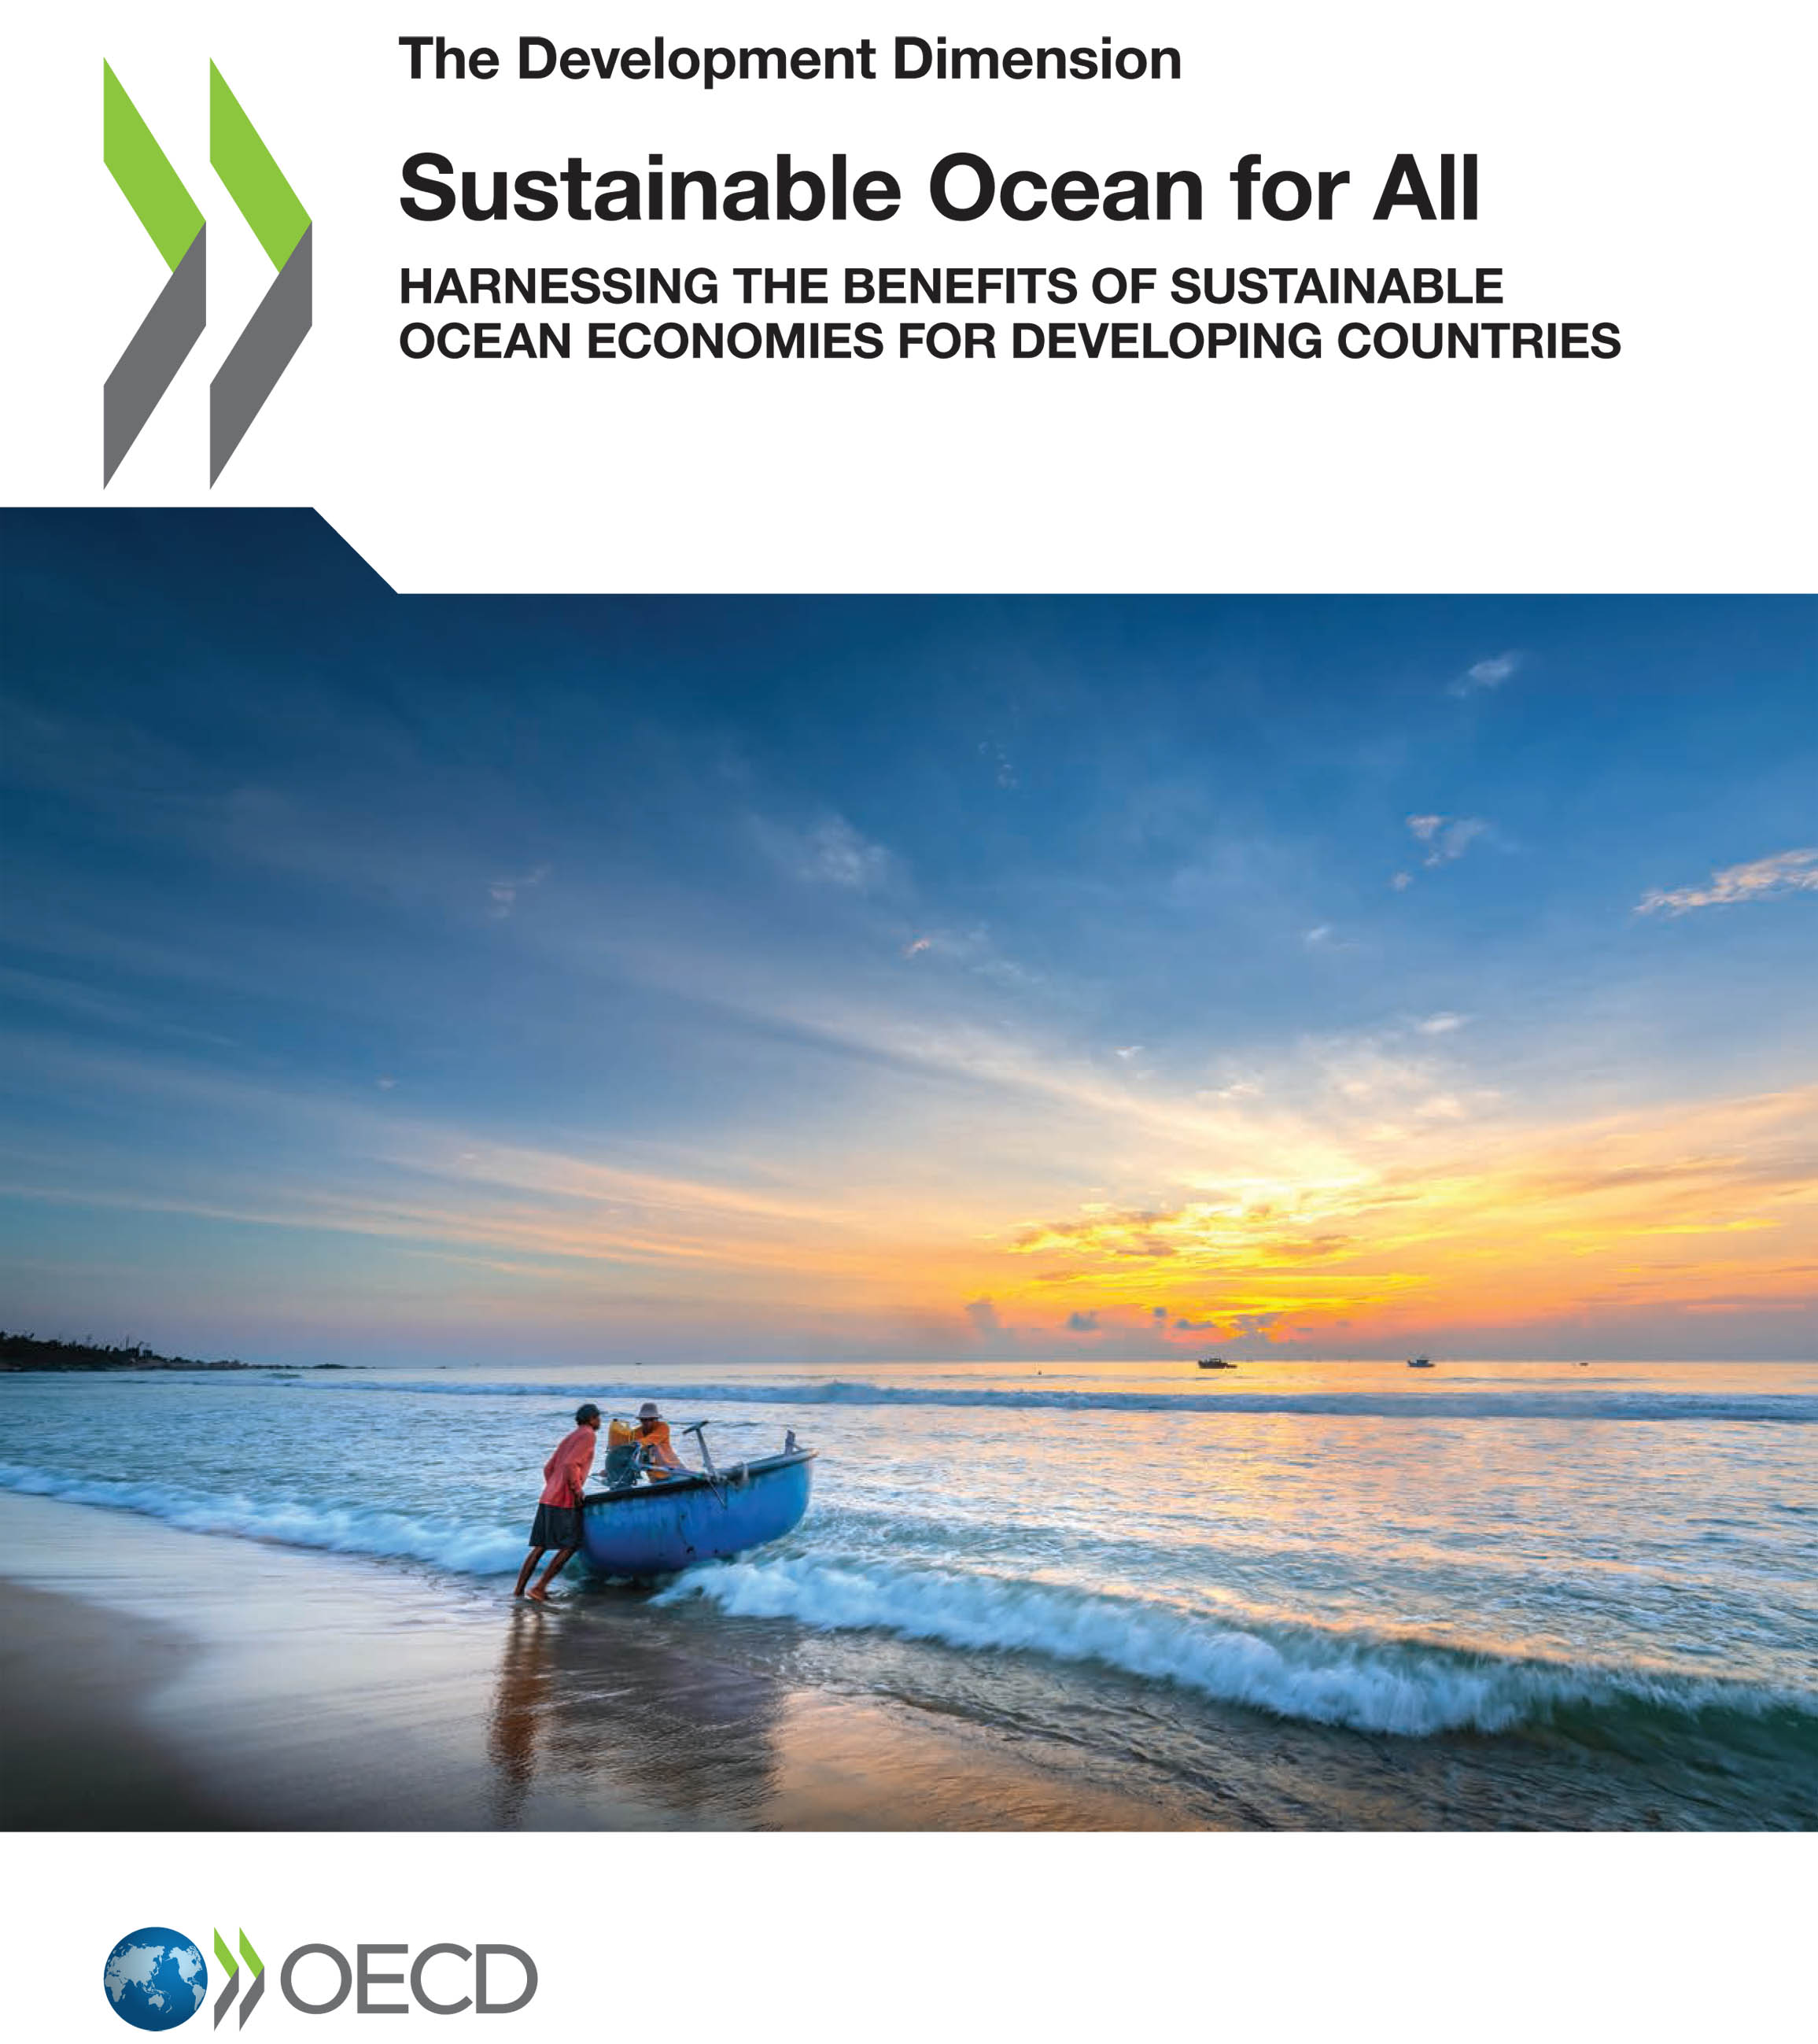 Sustainable Ocean for All OECD Report 2020